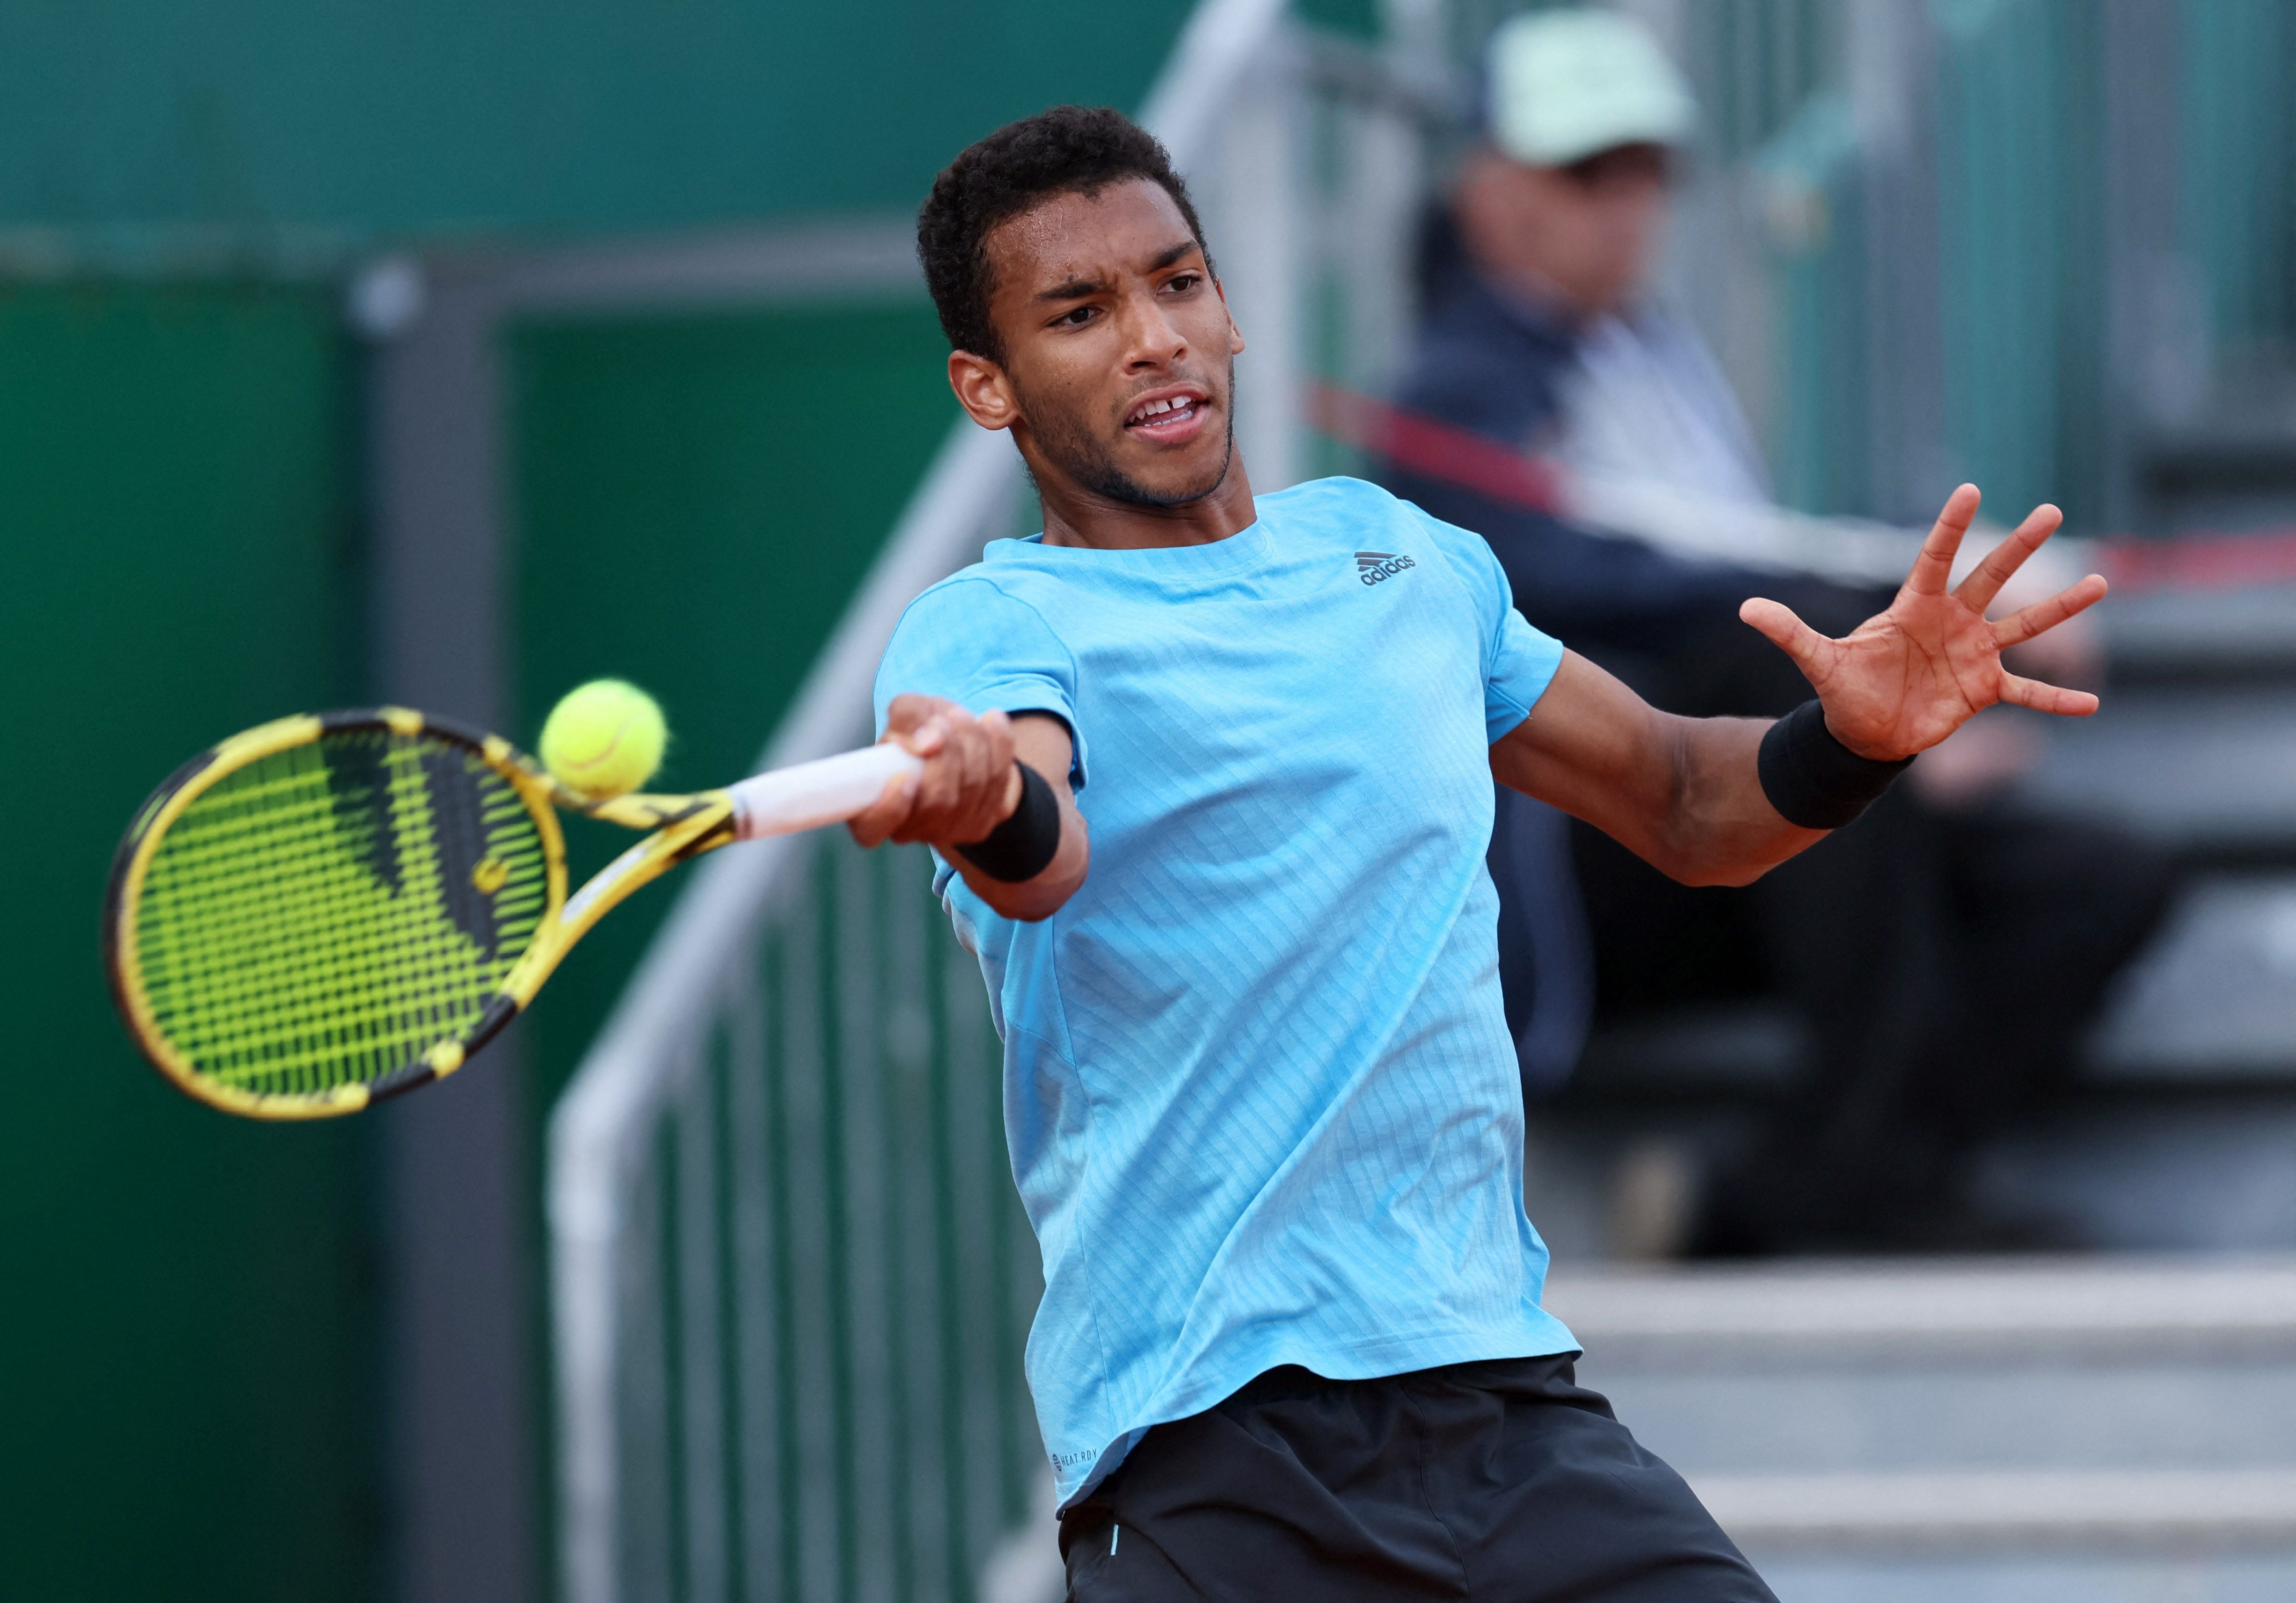 Felix Auger-Aliassime's struggles continue as he is upset in second round  of Monte Carlo Masters - The Globe and Mail